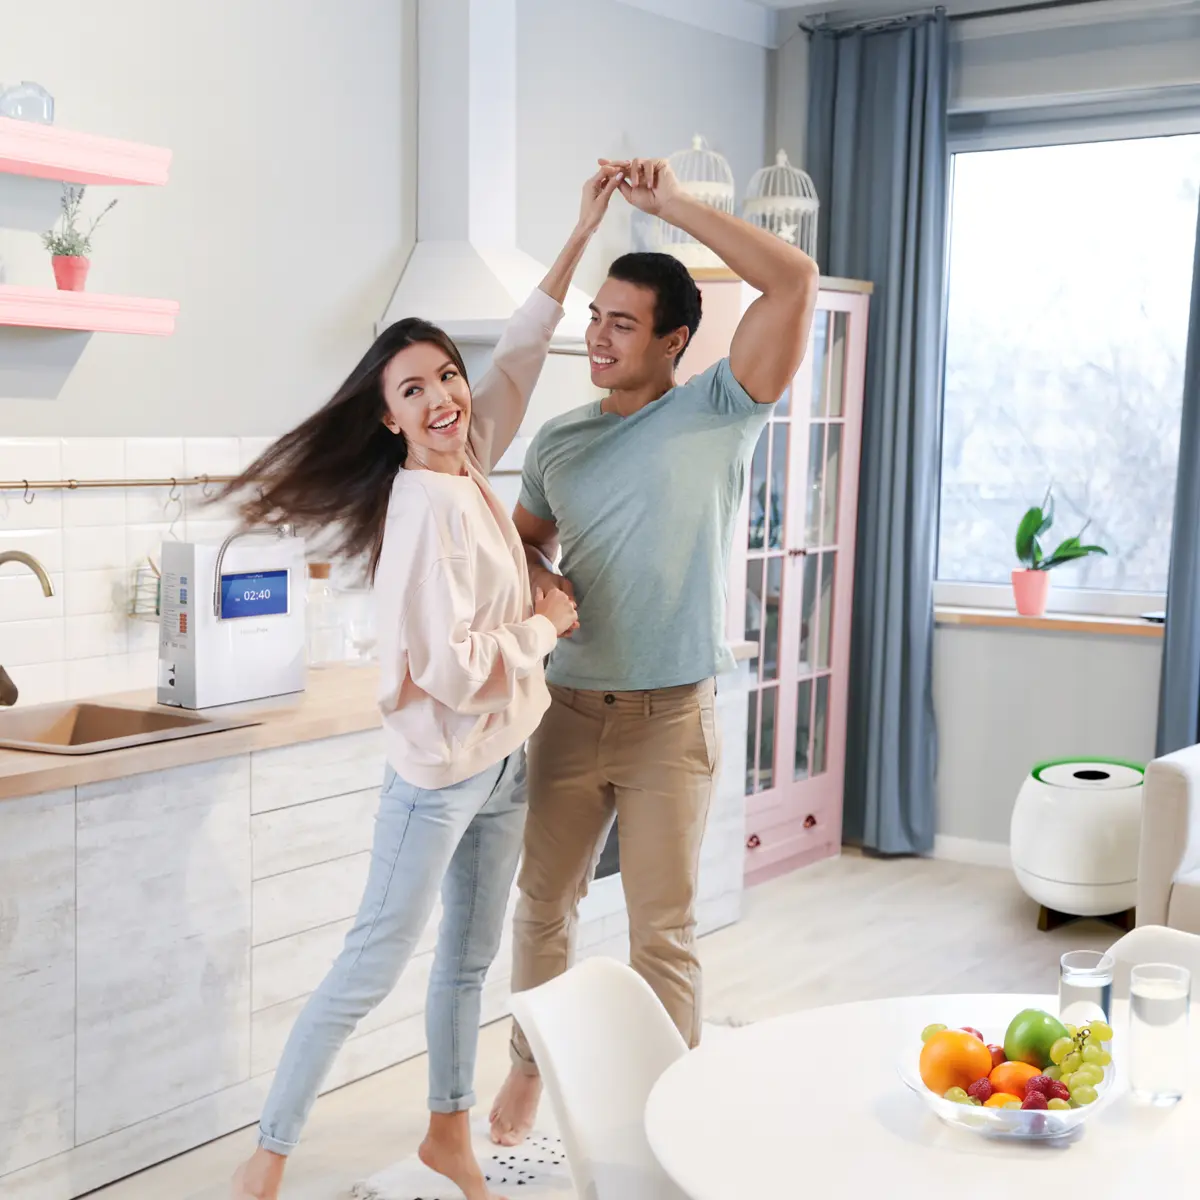 Guy dancing with a girl he considers his QNET Valentine in their HomePure Home